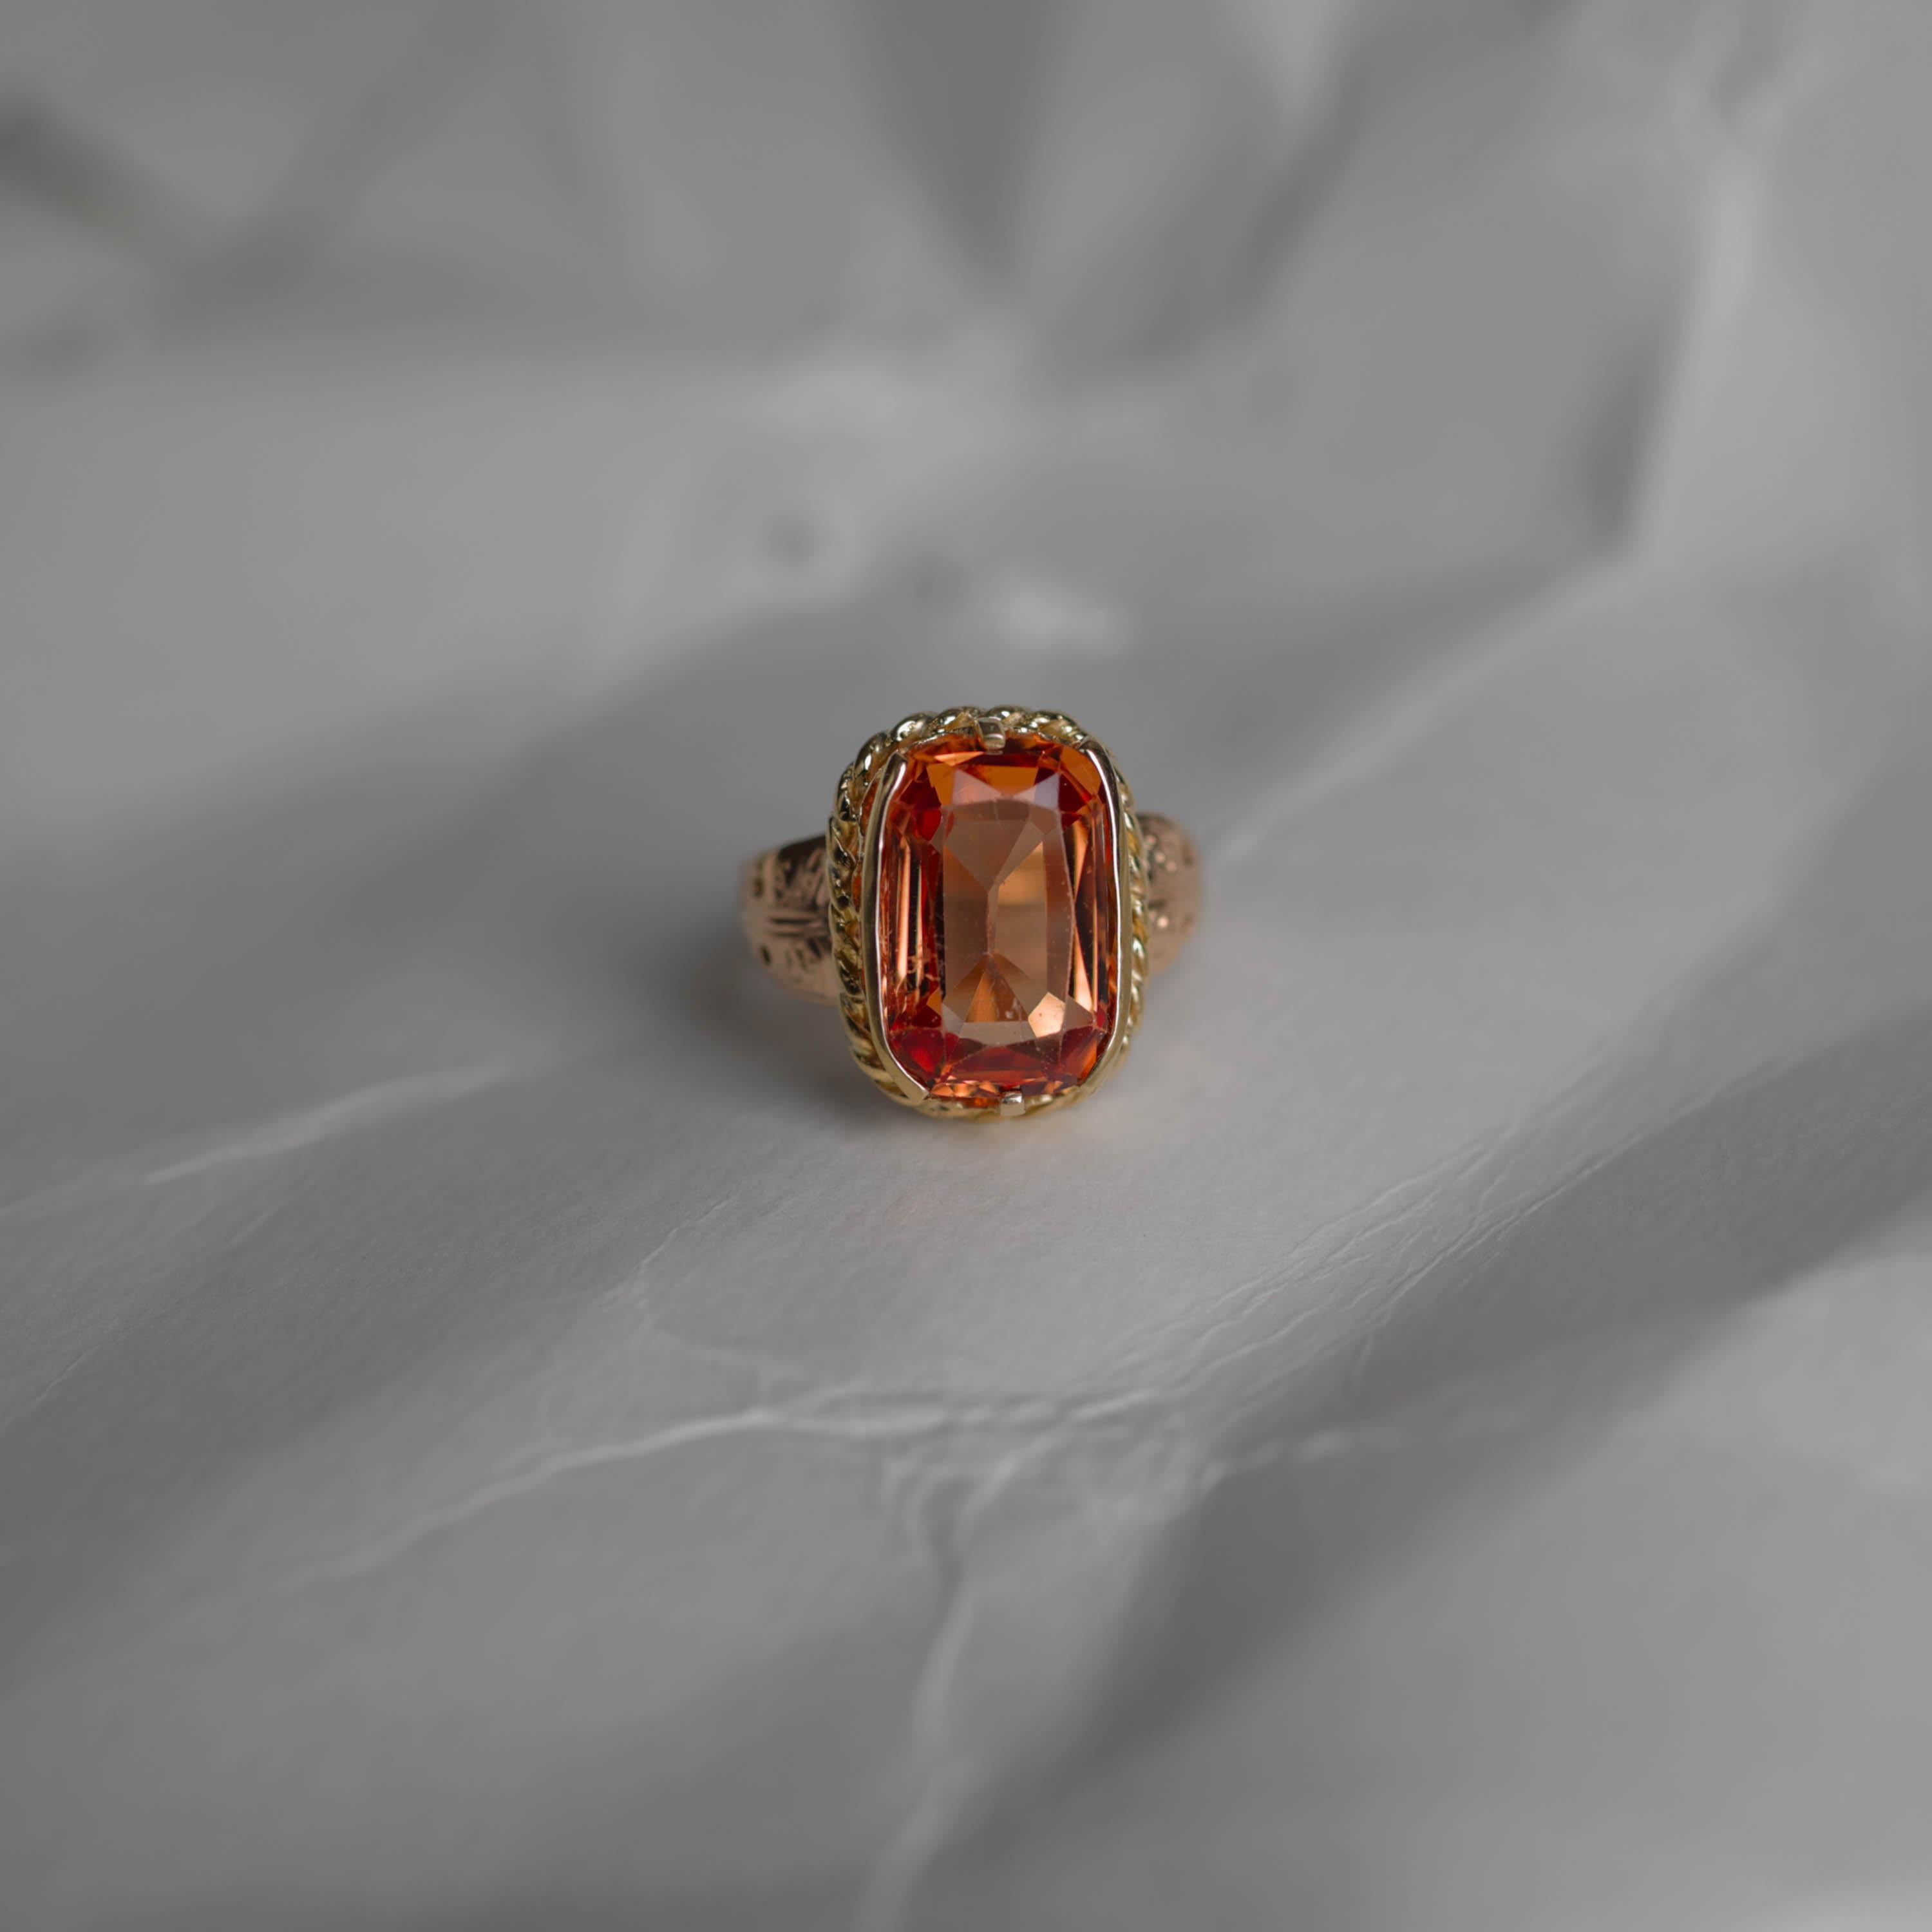 Imperial Topaz Ring Antique Certified Untreated Brazil Origin Size 8.5 For Sale 3